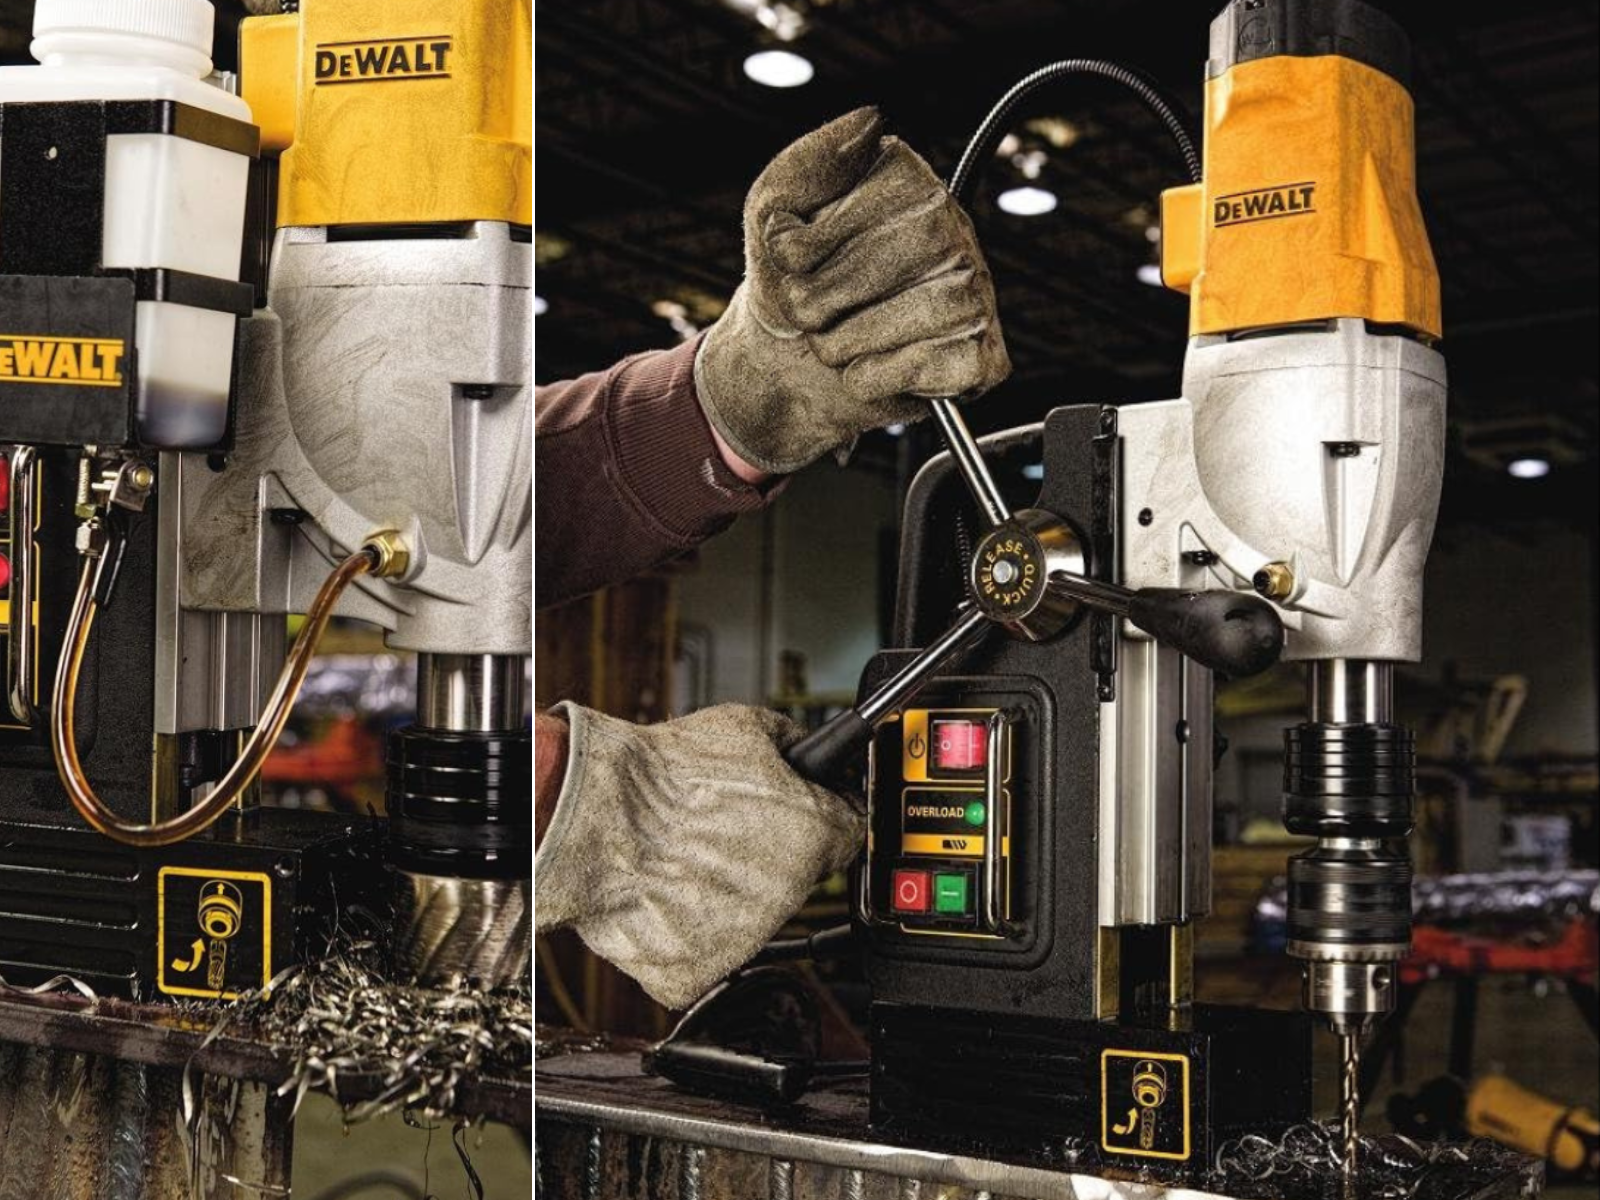 A drill press using for machining large surfaces, and a DeWalt press drilling a hole.